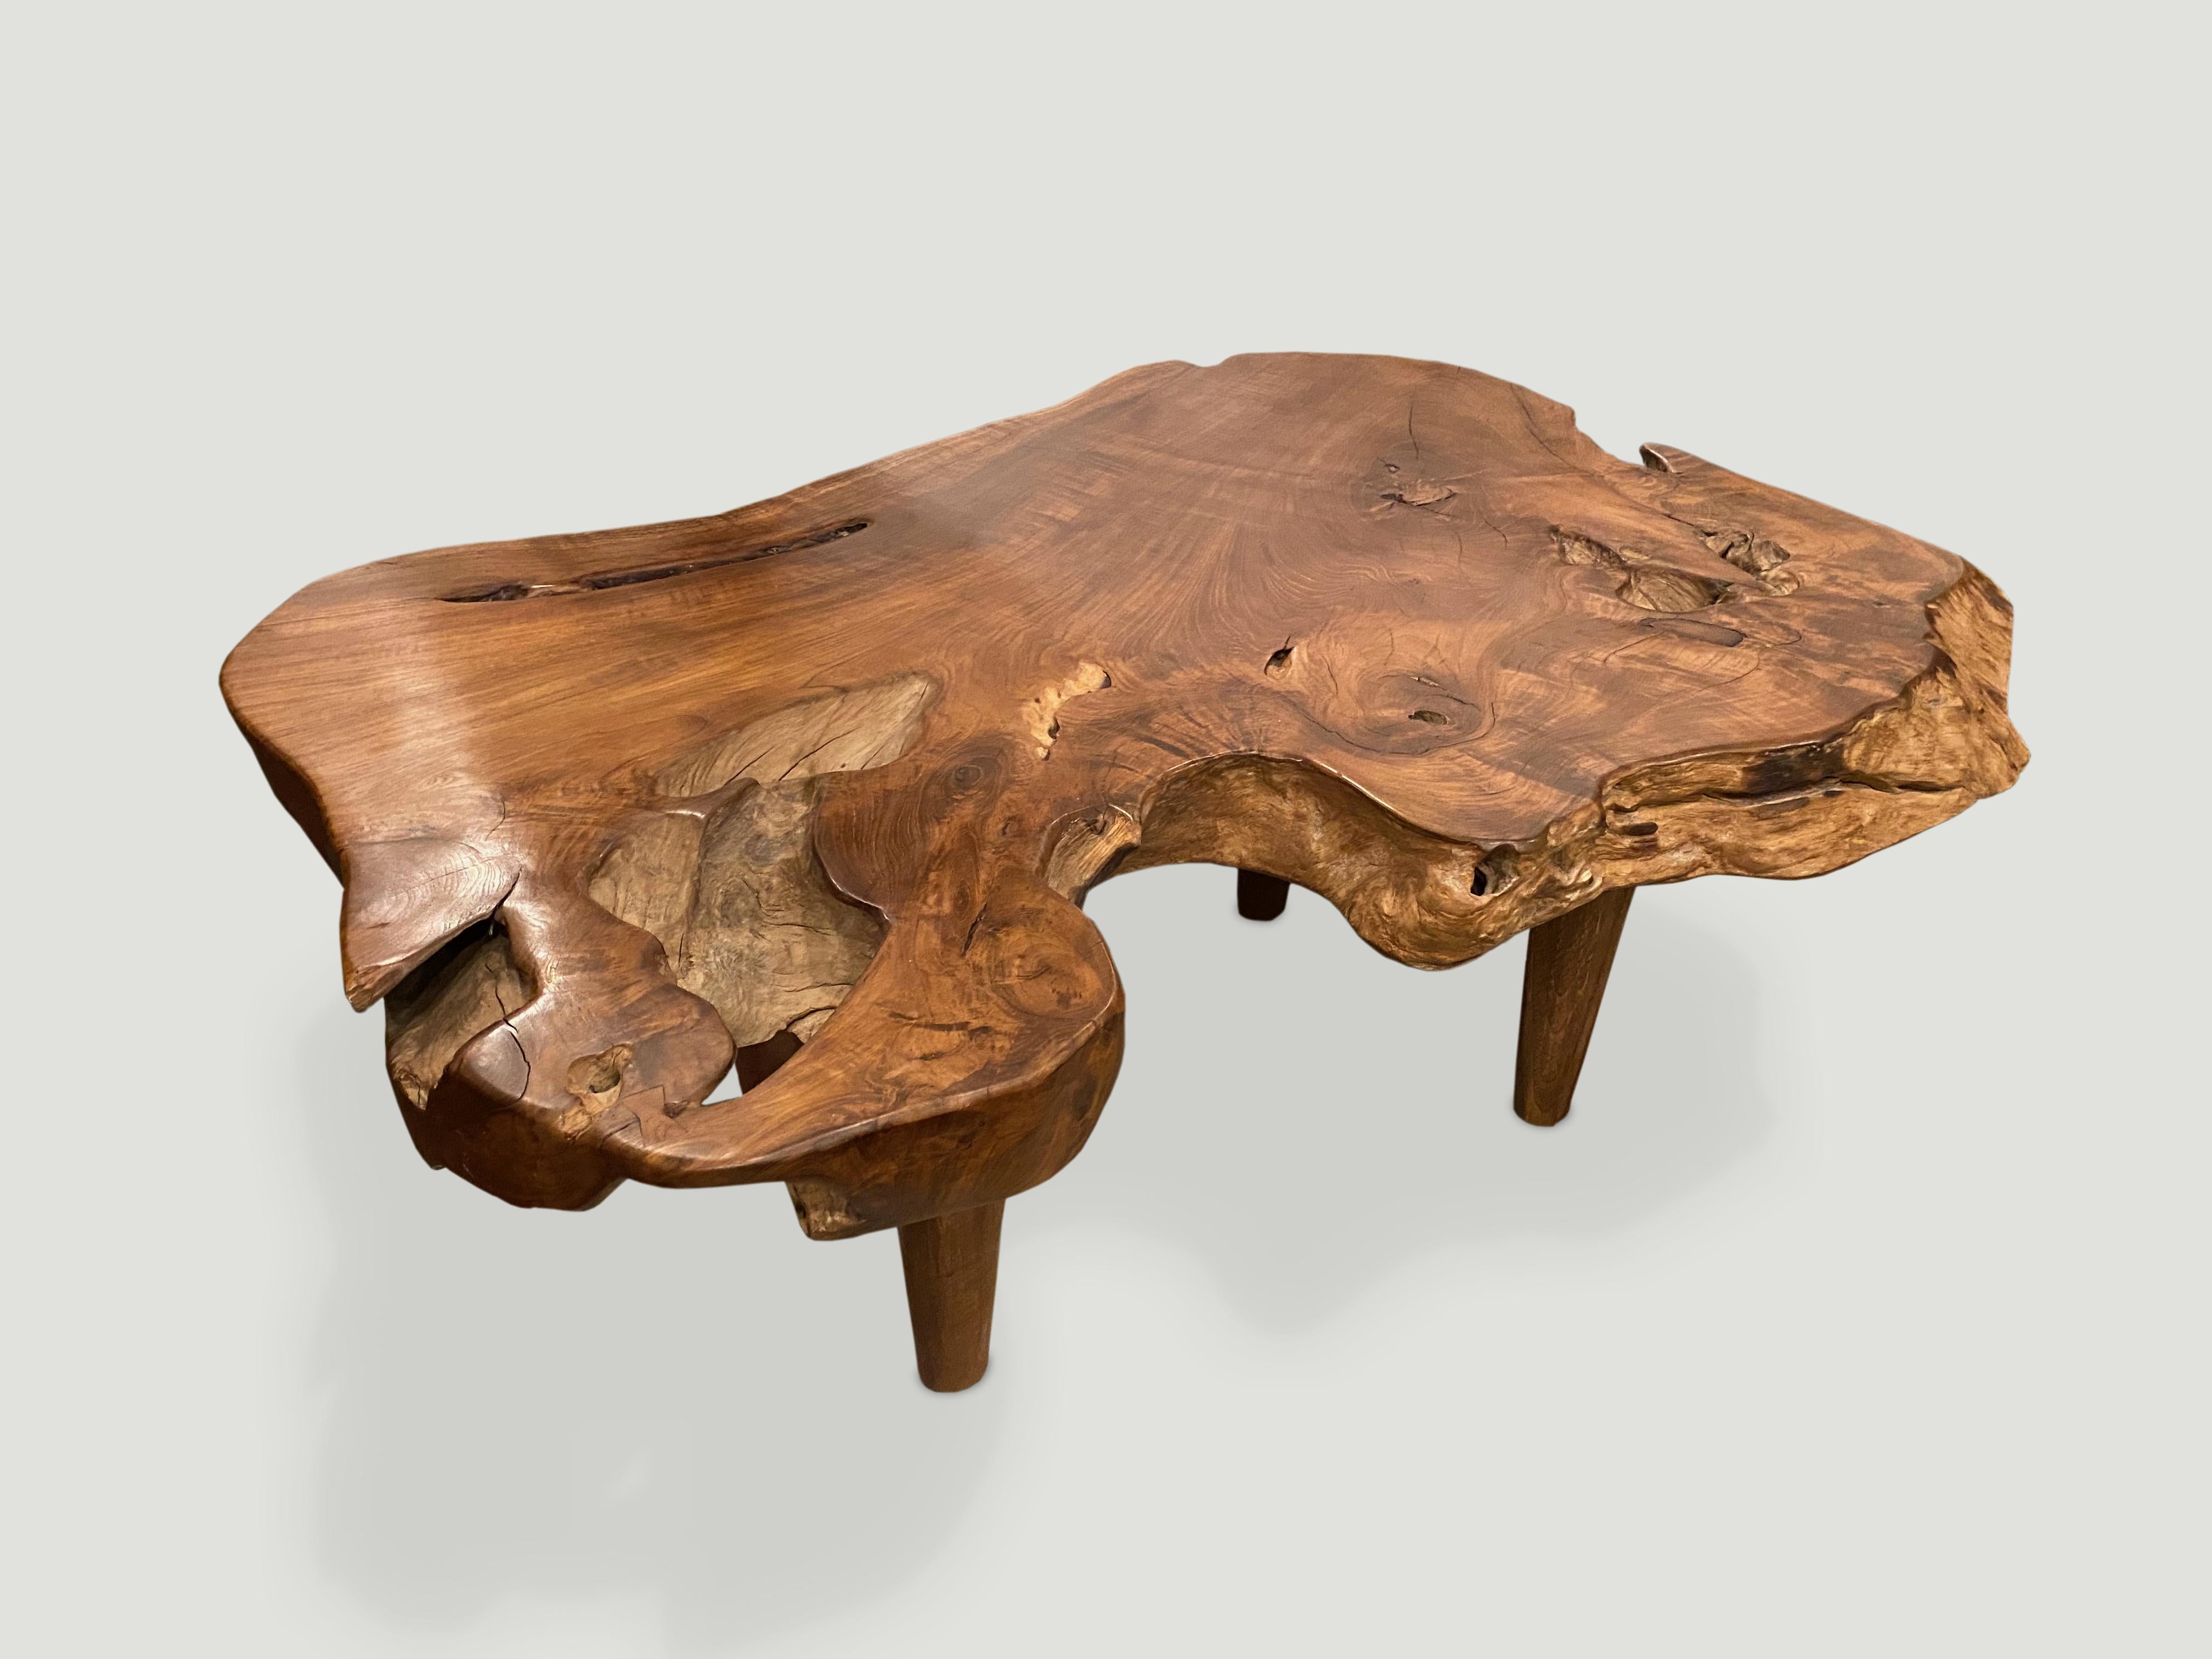 Reclaimed three inch thick teak wood coffee table with a natural oil finish. Floating on midcentury style legs.

Andrianna Shamaris. The Leader In Modern Organic Design.